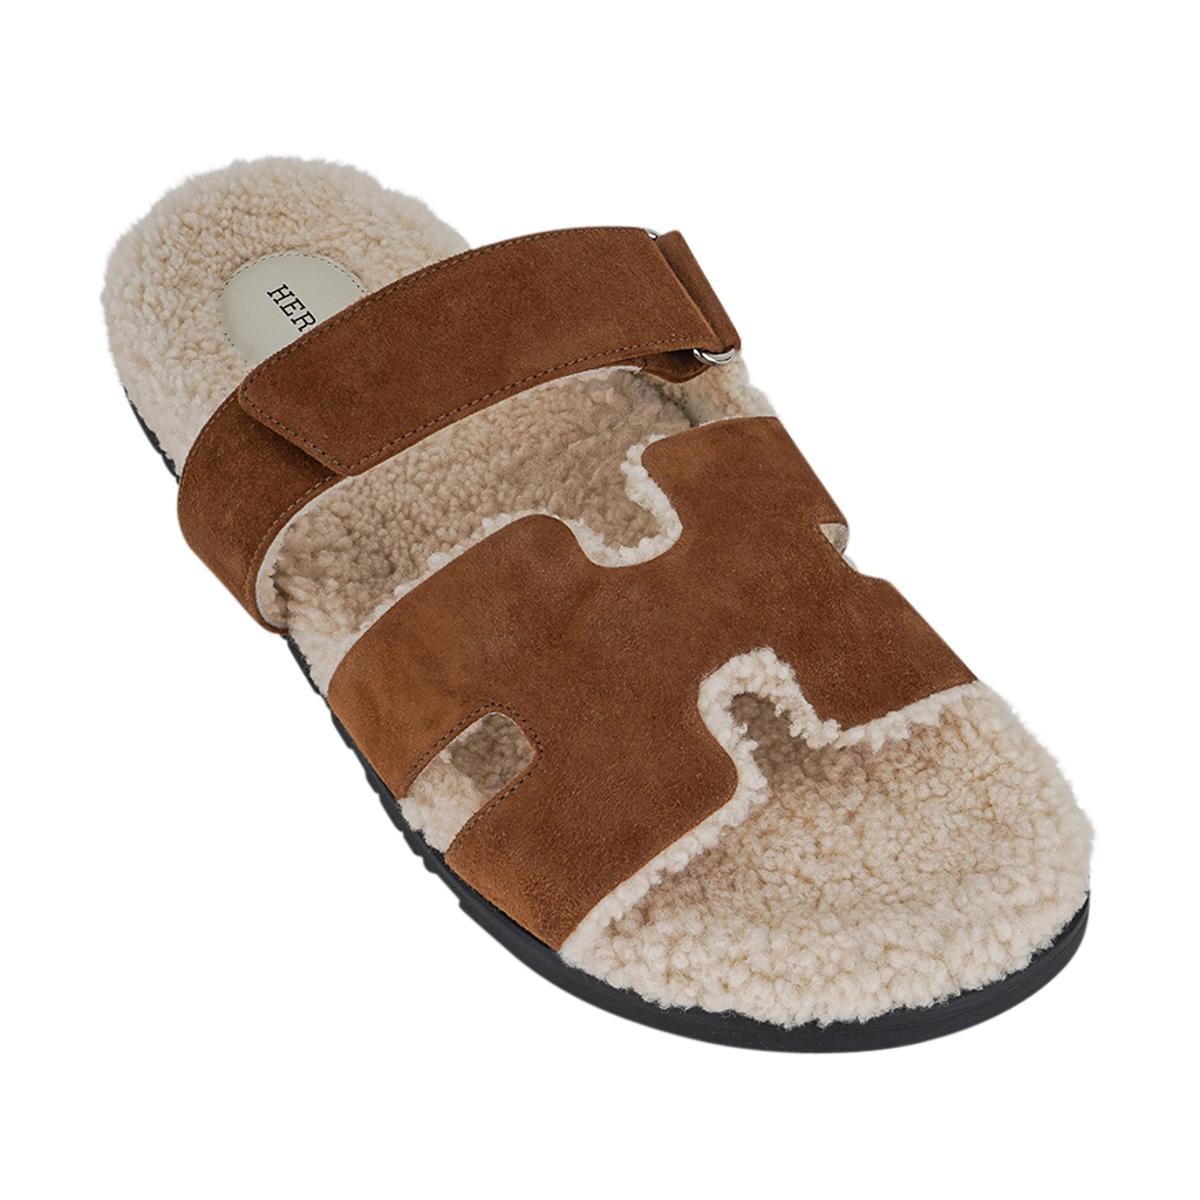 Mightychic offers a limited edition Hermes Men's Brun Fume and Ecru Chypre Veau Indios Woolskin sandals featured in suede.
The iconic H cutout over the top of the foot in Doblis with ecru shearling insole and H embossed rubber sole.
Beautiful warm